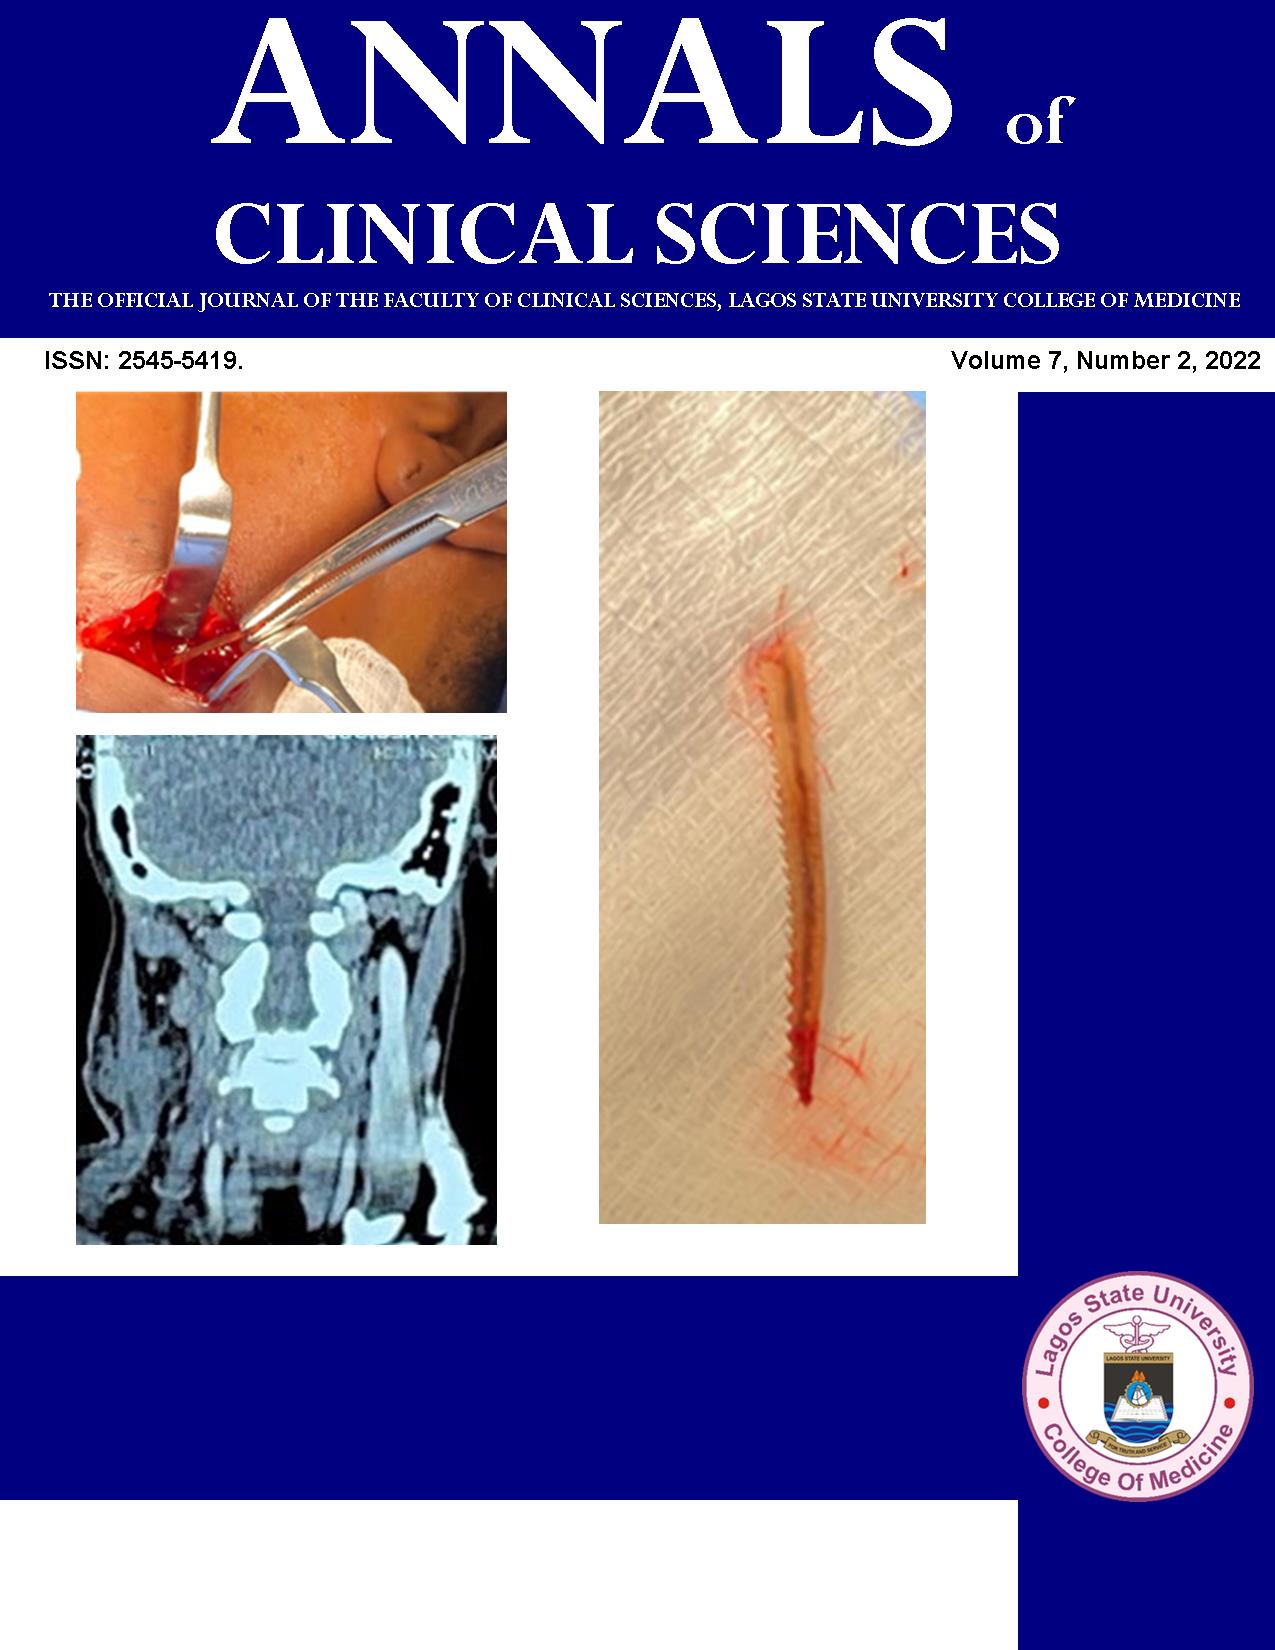 					View Vol. 7 No. 2 (2022): Annals of Clinical Sciences
				